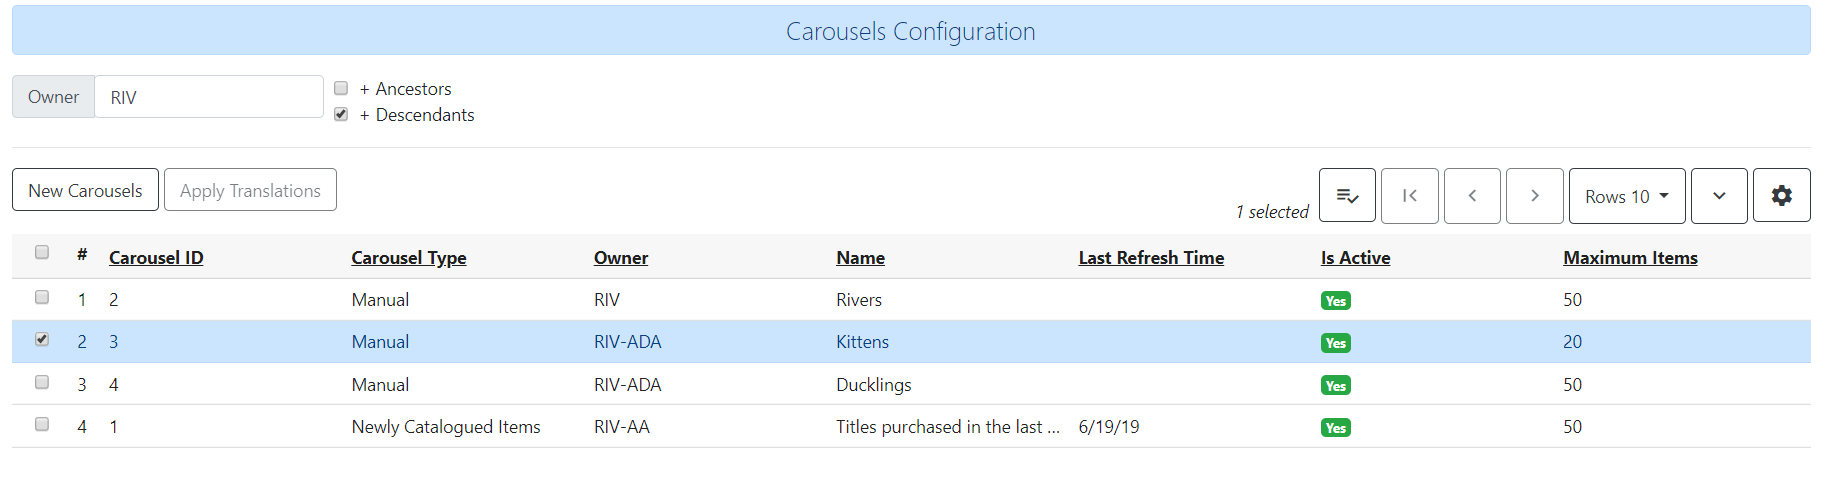 Carousels configuration screen